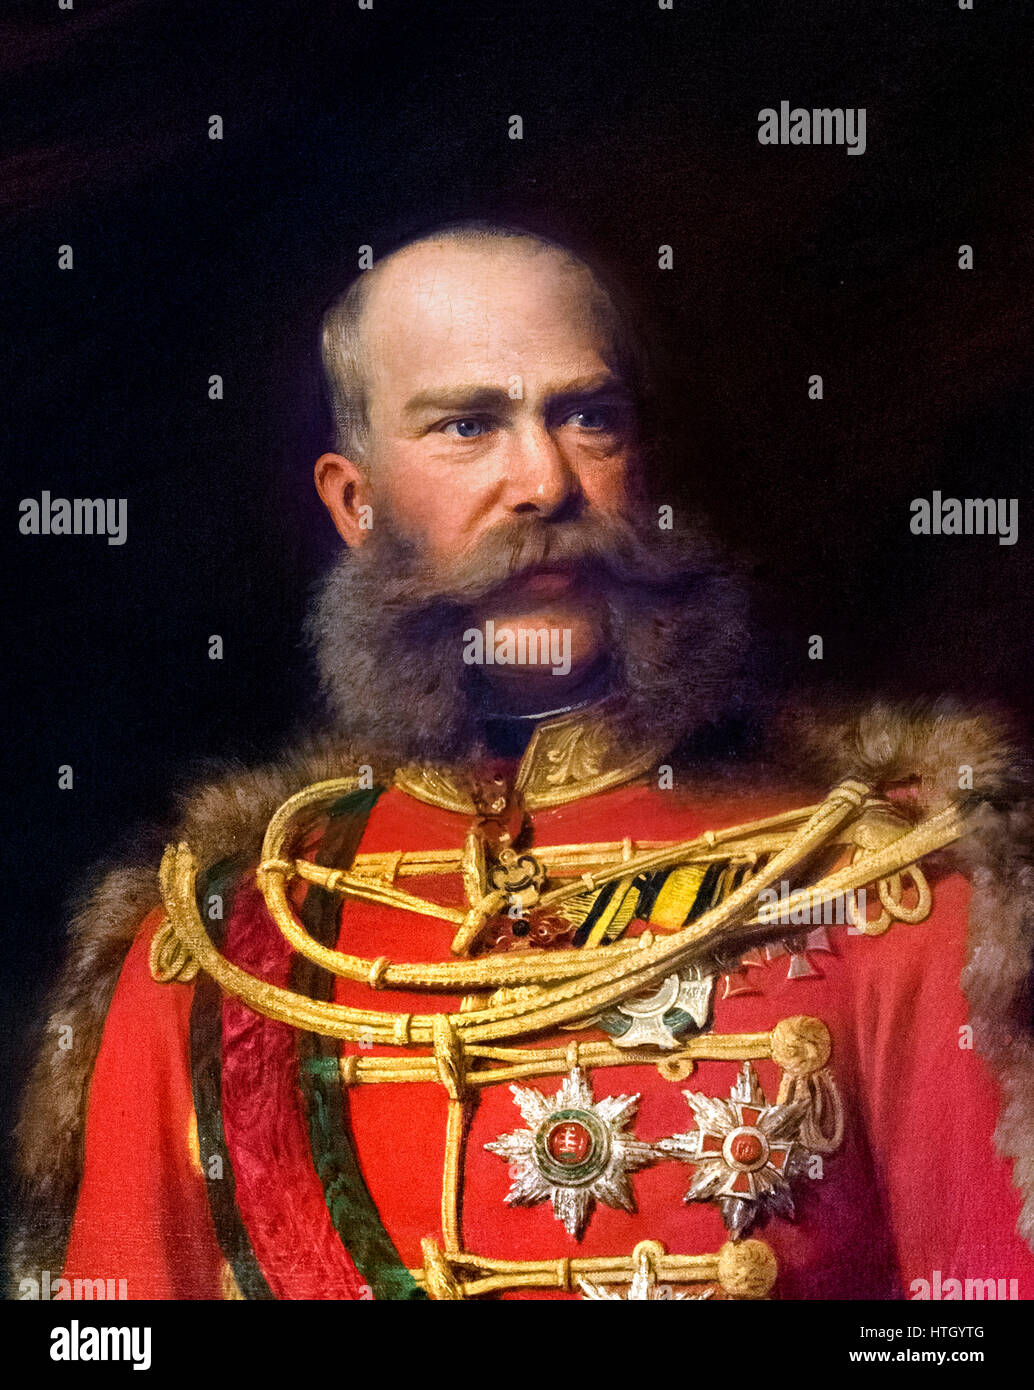 Franz Joseph I (Franz Josef I: 1830-1916), Emperor of Austria, and King of Hungary, Croatia and Bohemia. Portrait by Josef Kis, oil on canvas, c.1867-1870. Detai from a larger painting, HTGYTC. Stock Photo